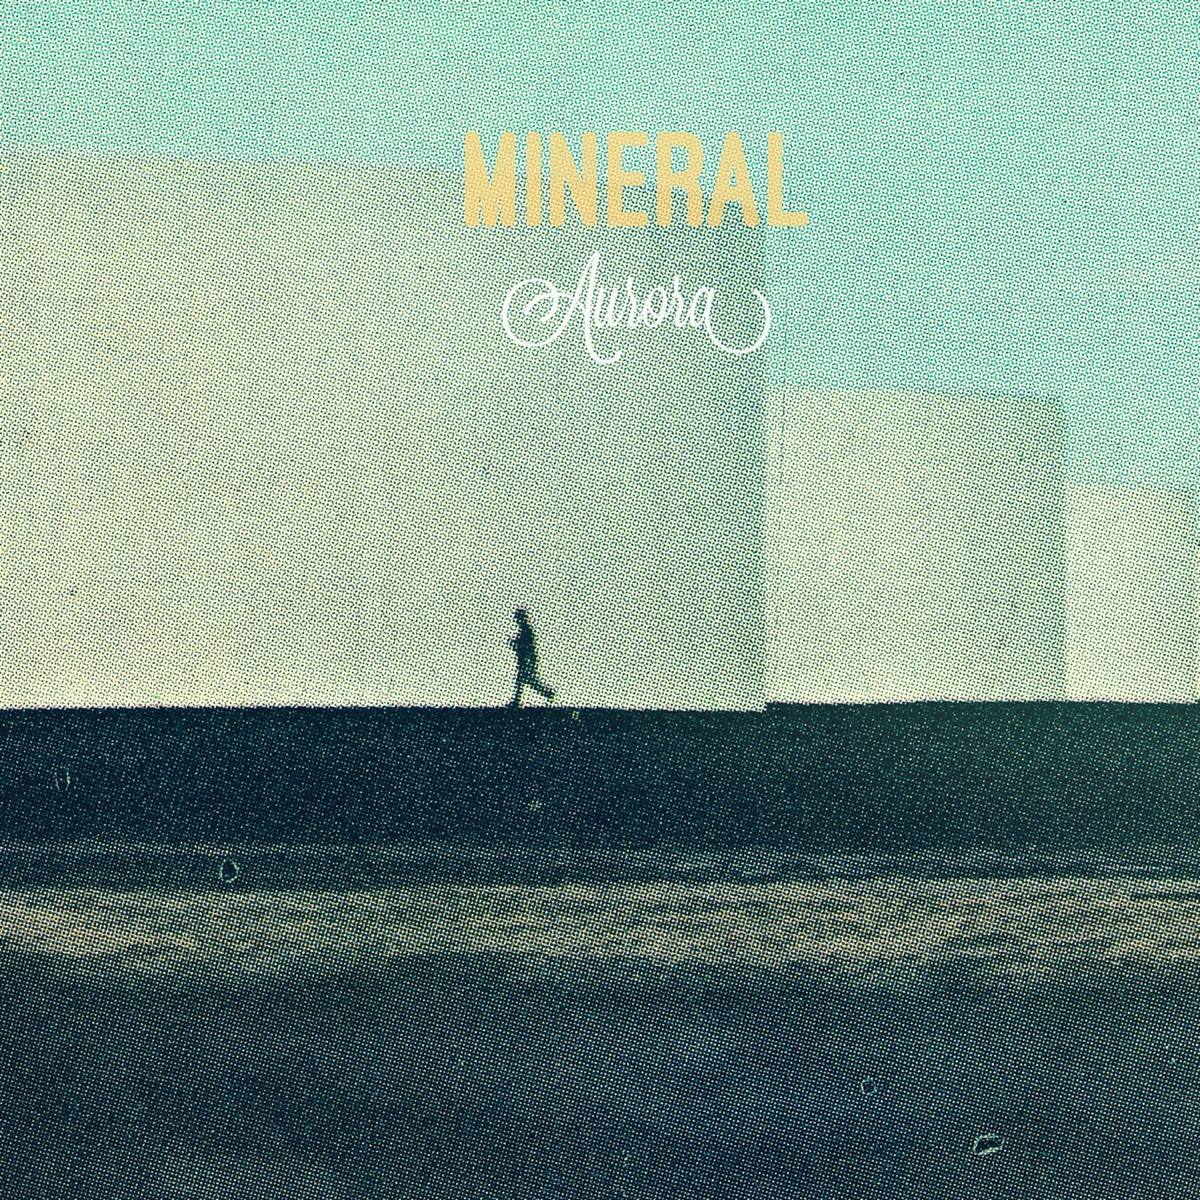 One Day When We Are Young: Mineral at 25